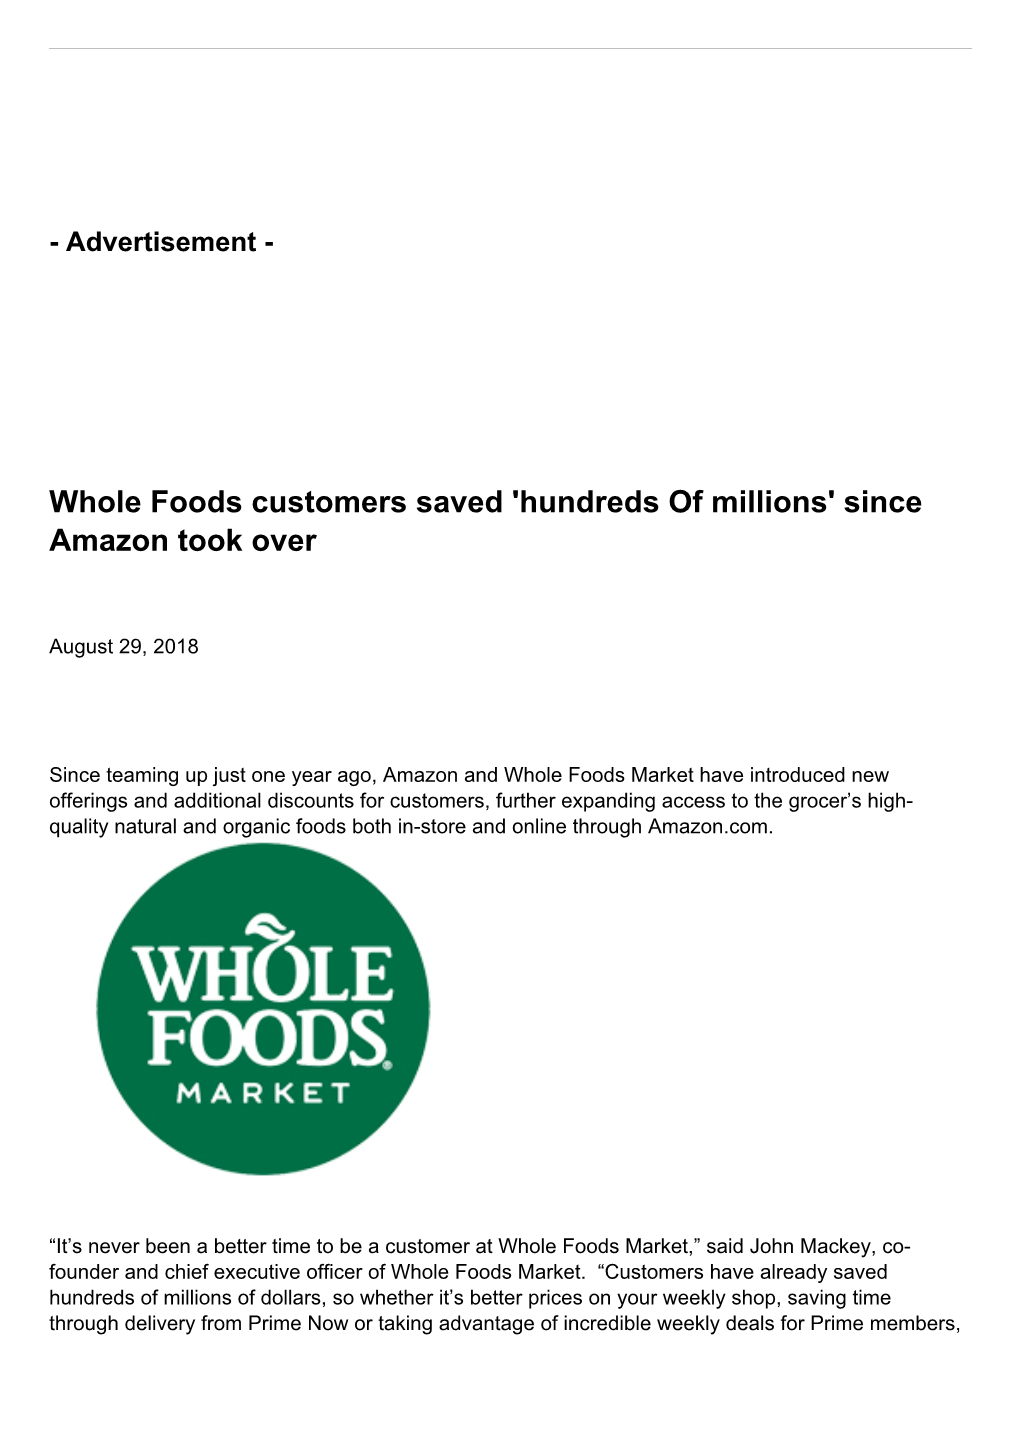 Whole Foods Customers Saved 'Hundreds of Millions' Since Amazon Took Over